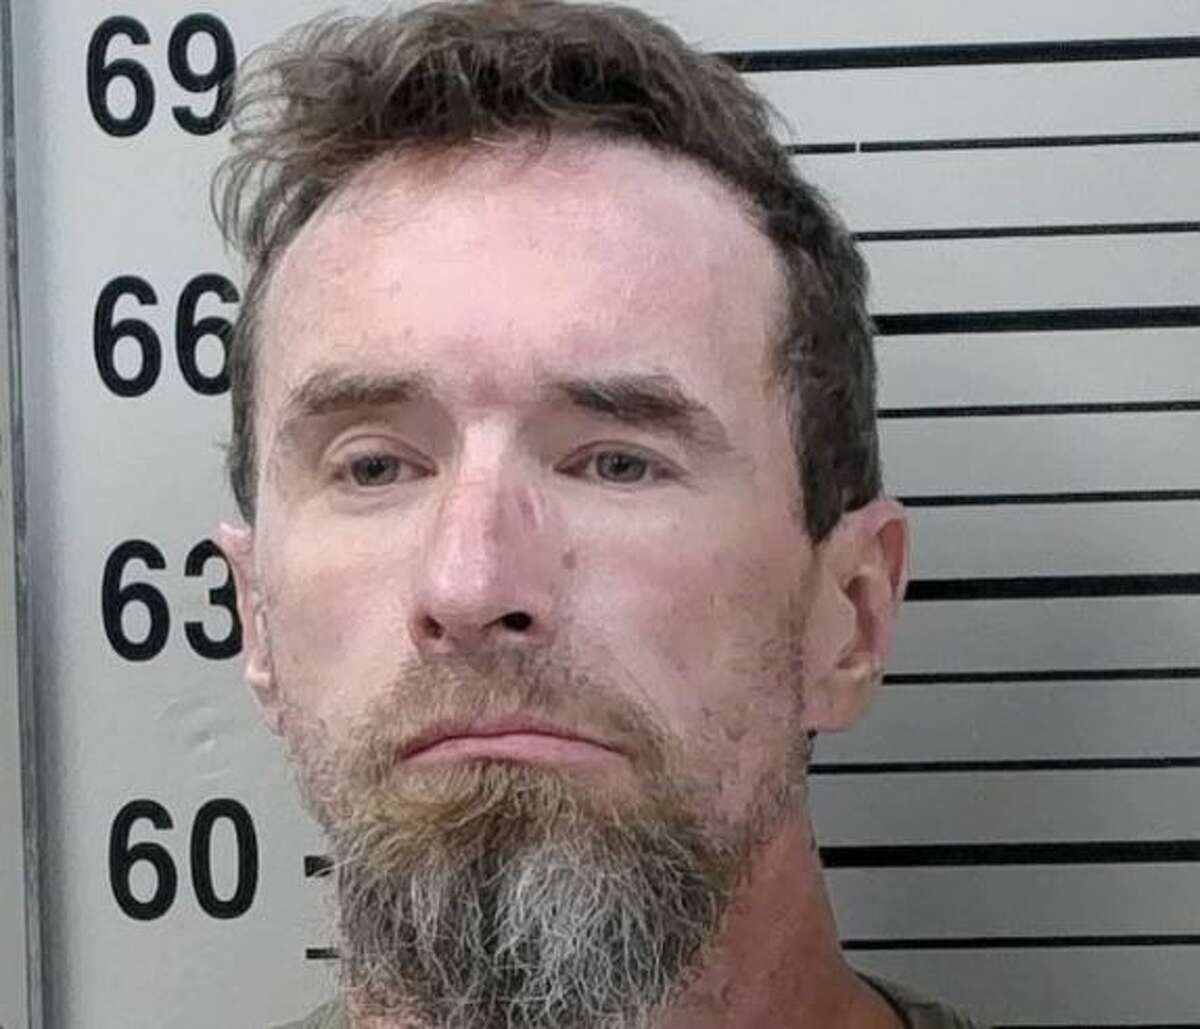 5th Class And Xx - 44-year-old Alton man faces 5 child pornography charges